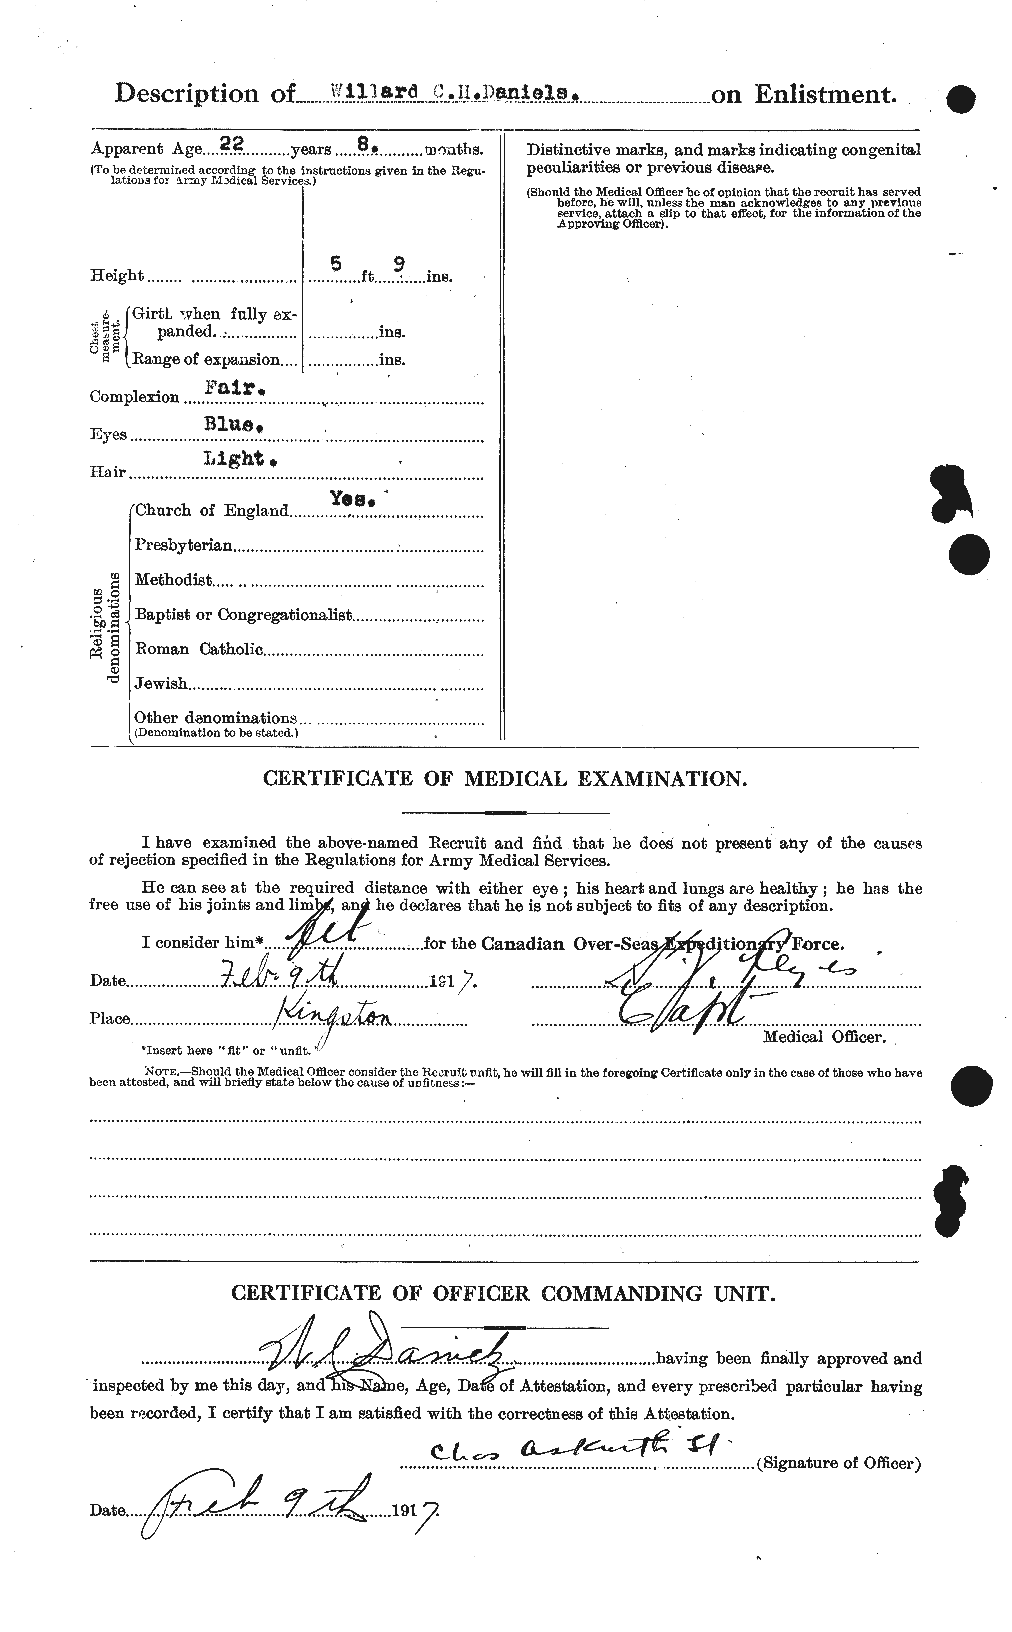 Personnel Records of the First World War - CEF 279687b